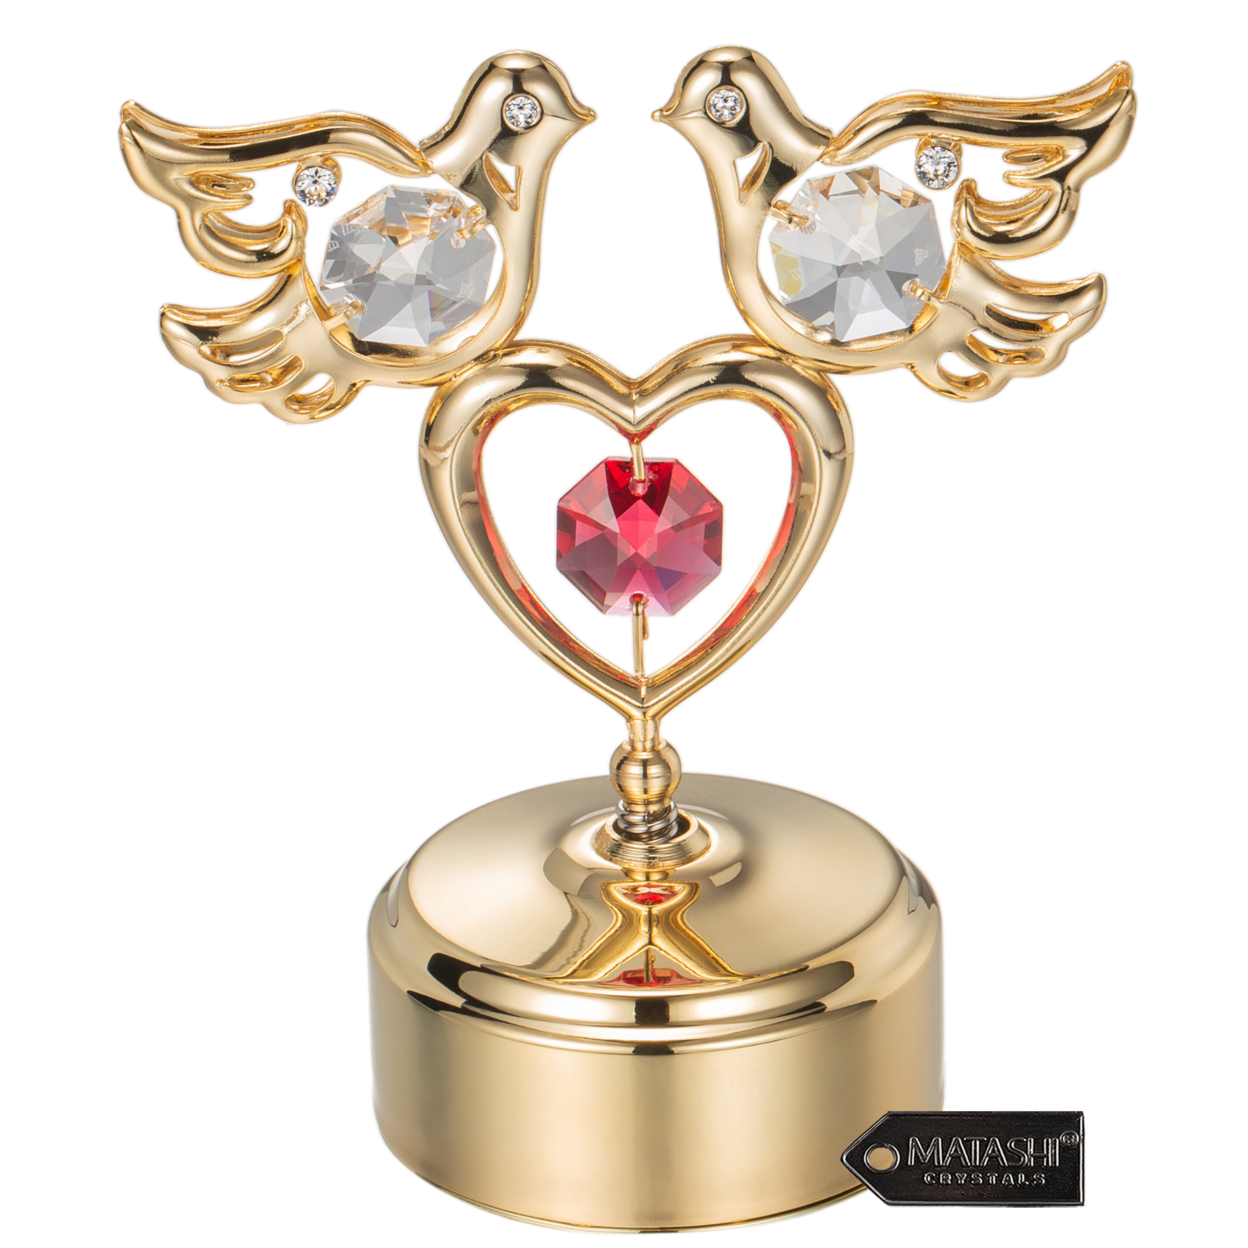 24K Gold Plated Music Box With Clear Crystal Studded Love Doves Red Crystal Studded Heart Figurine On A Smooth Base By Matashi